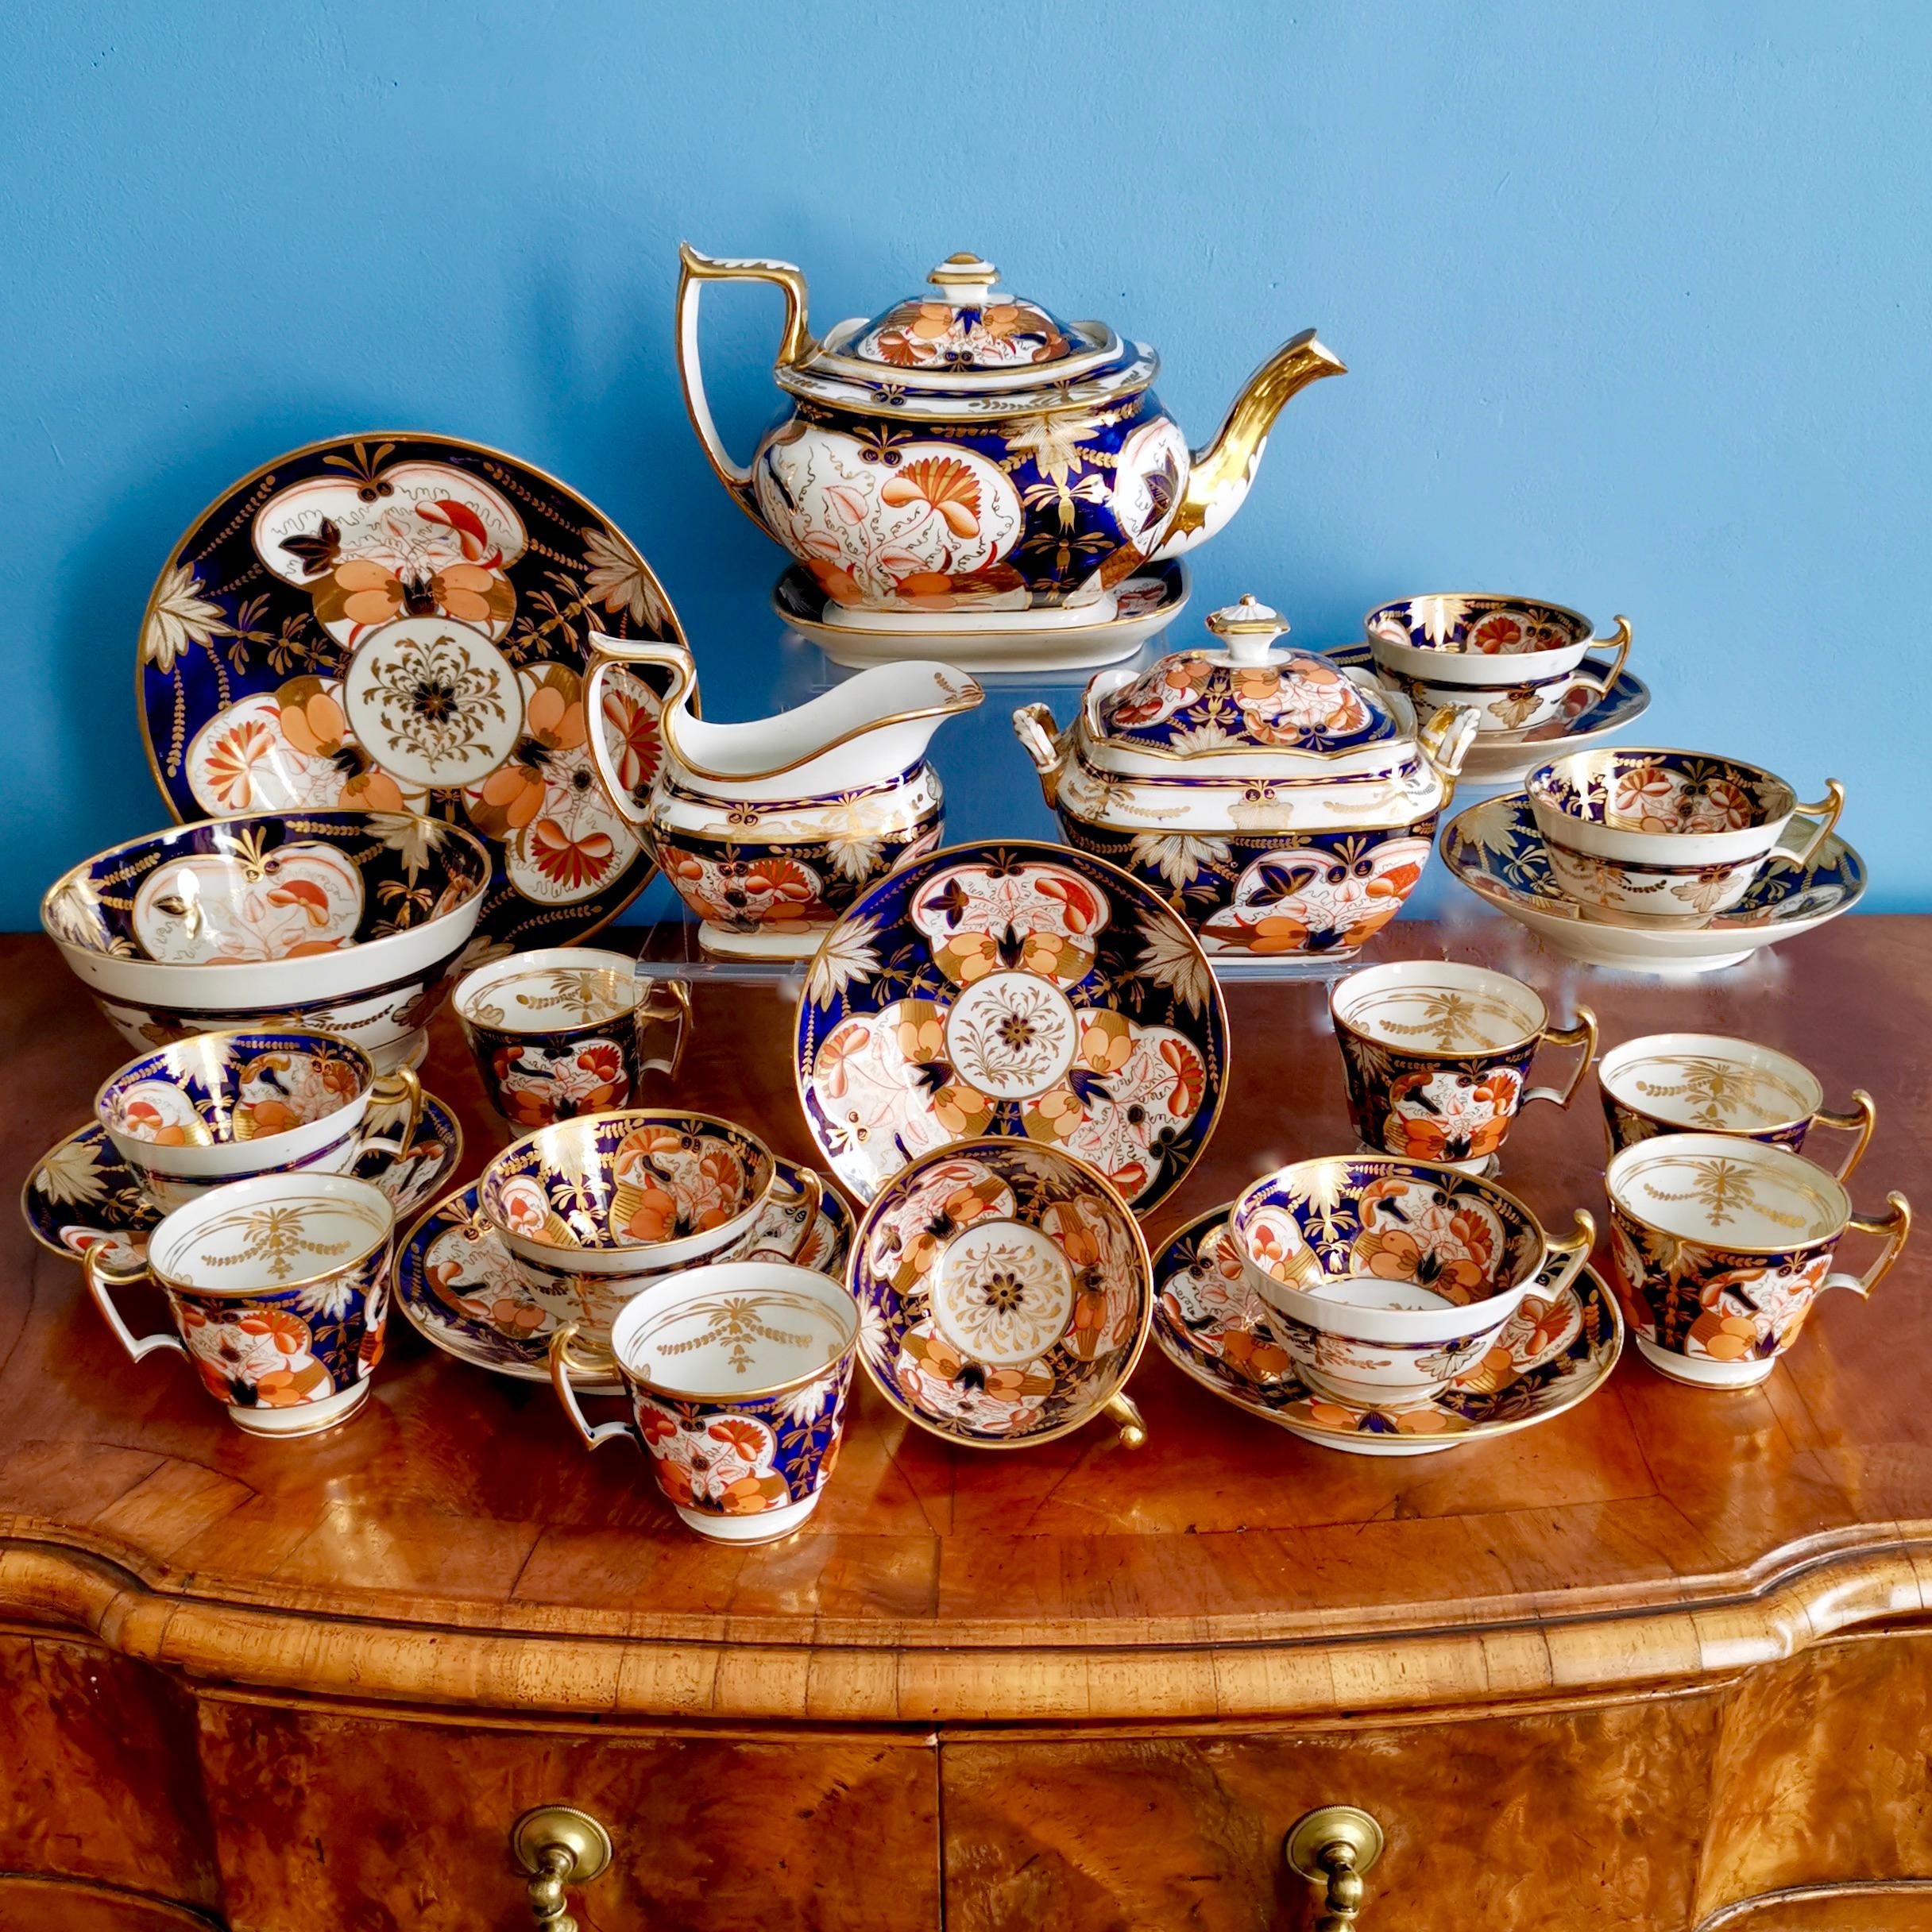 This is a stunning tea service made by John Rose / Coalport in circa 1815, which was the Regency era. It is decorated in a bright Imari design and is in excellent condition. It consists of a teapot on a stand, a milk jug, a lidded sucrier, a slop